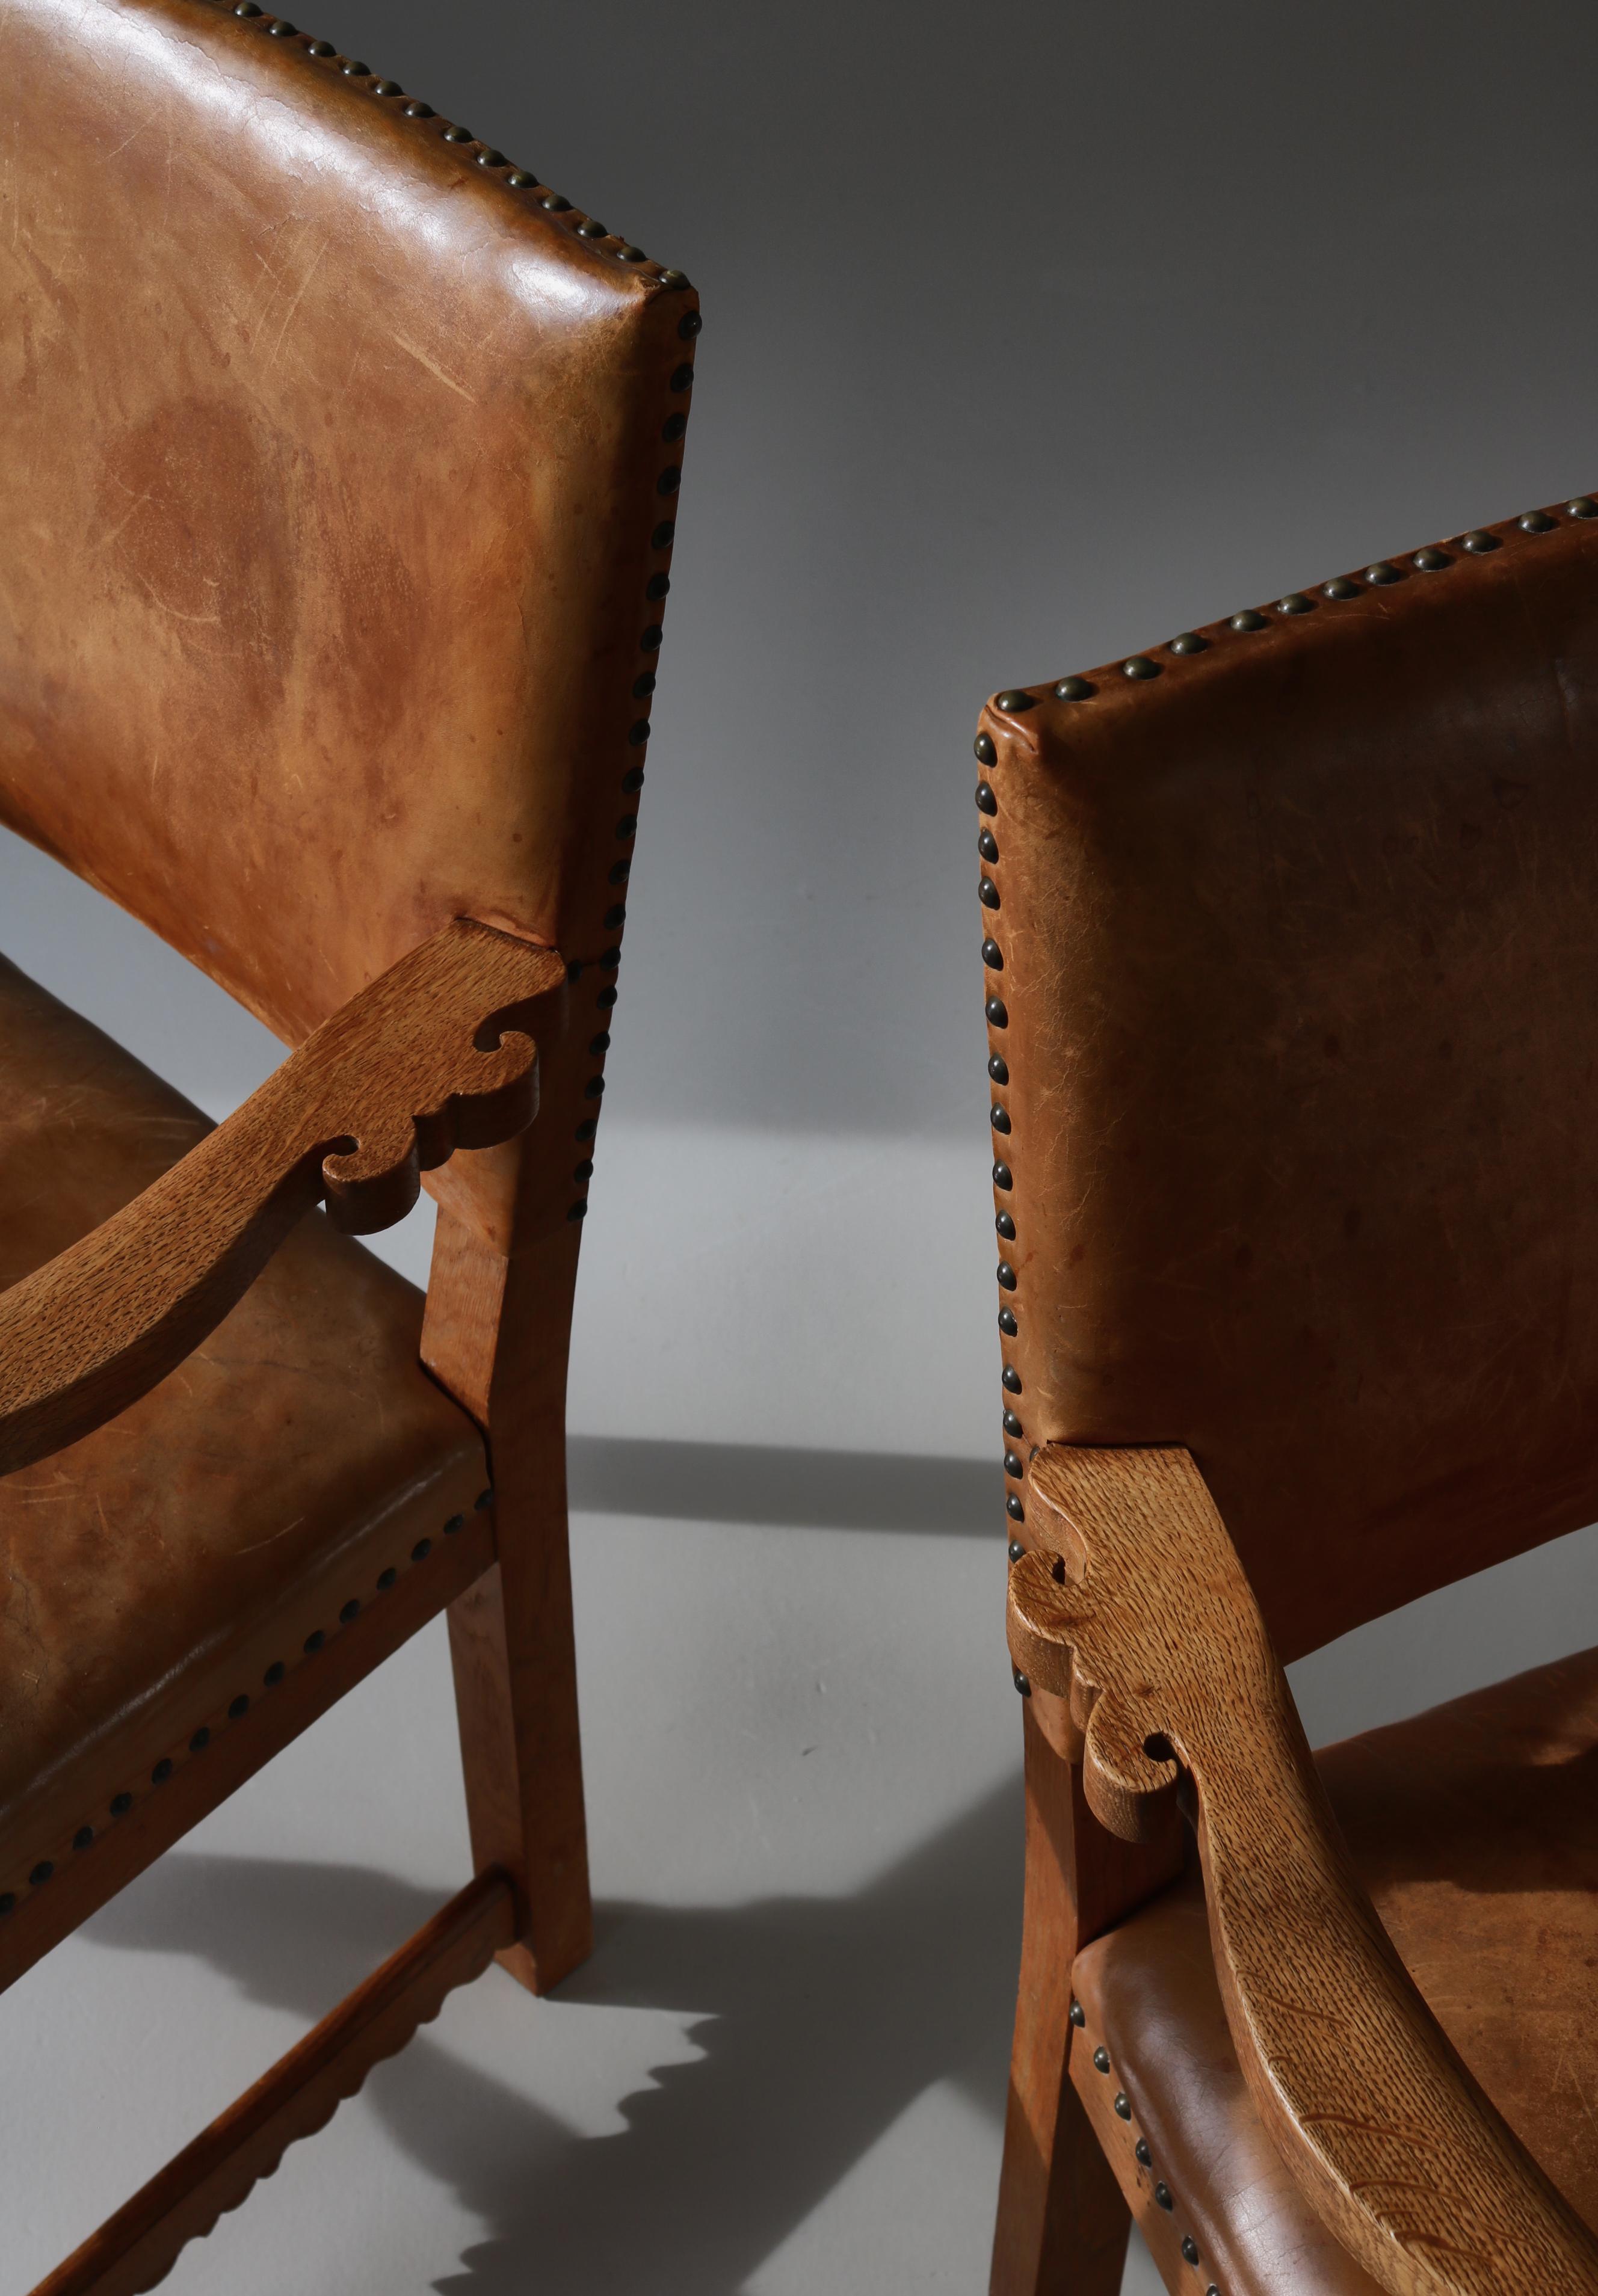 Stunning pair of sculptural armchairs in solid oak and natural leather made by Danish Master Cabinetmaker Lars Møller, Copenhagen in the 1930s. The chairs are modern but with a playful expression and many fine details like the skilfully carved